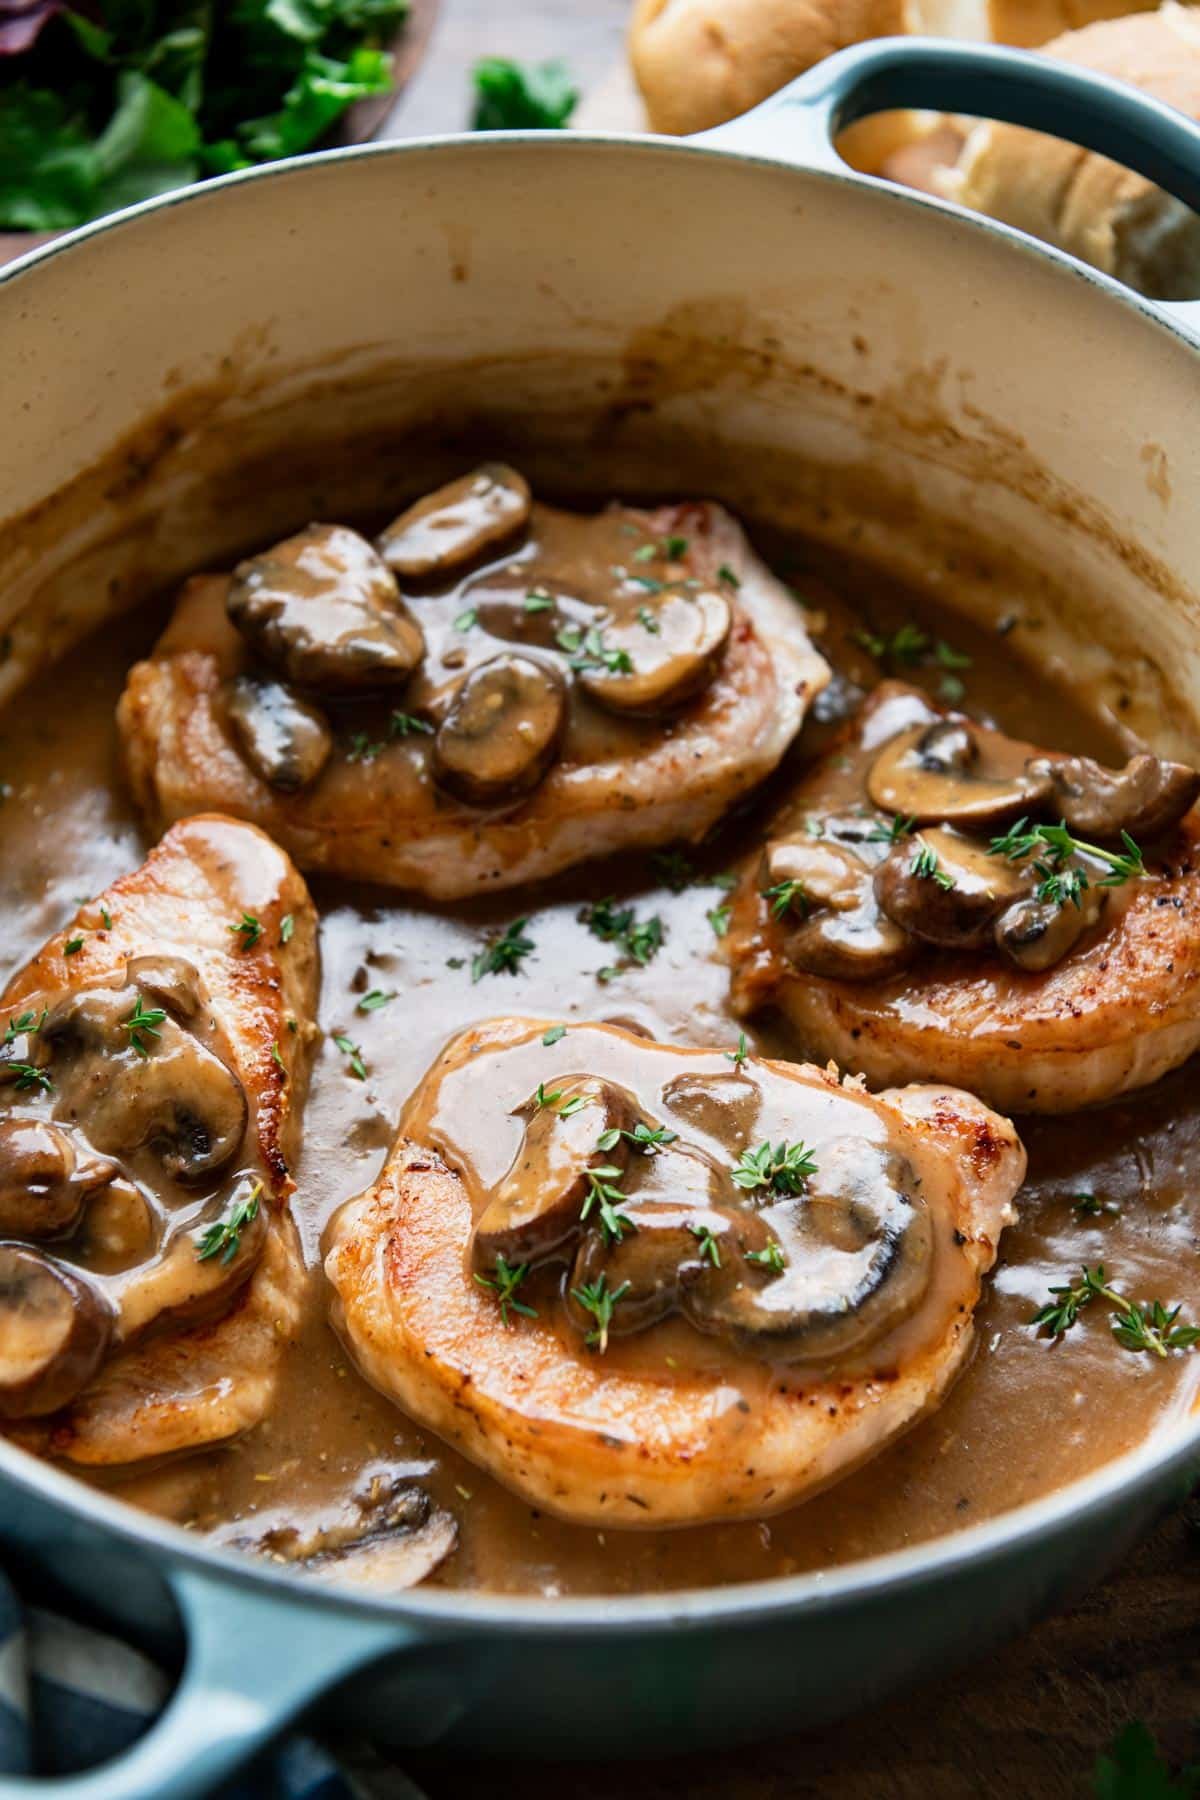 Pork chops and mushroom gravy in a large cast iron Dutch oven.